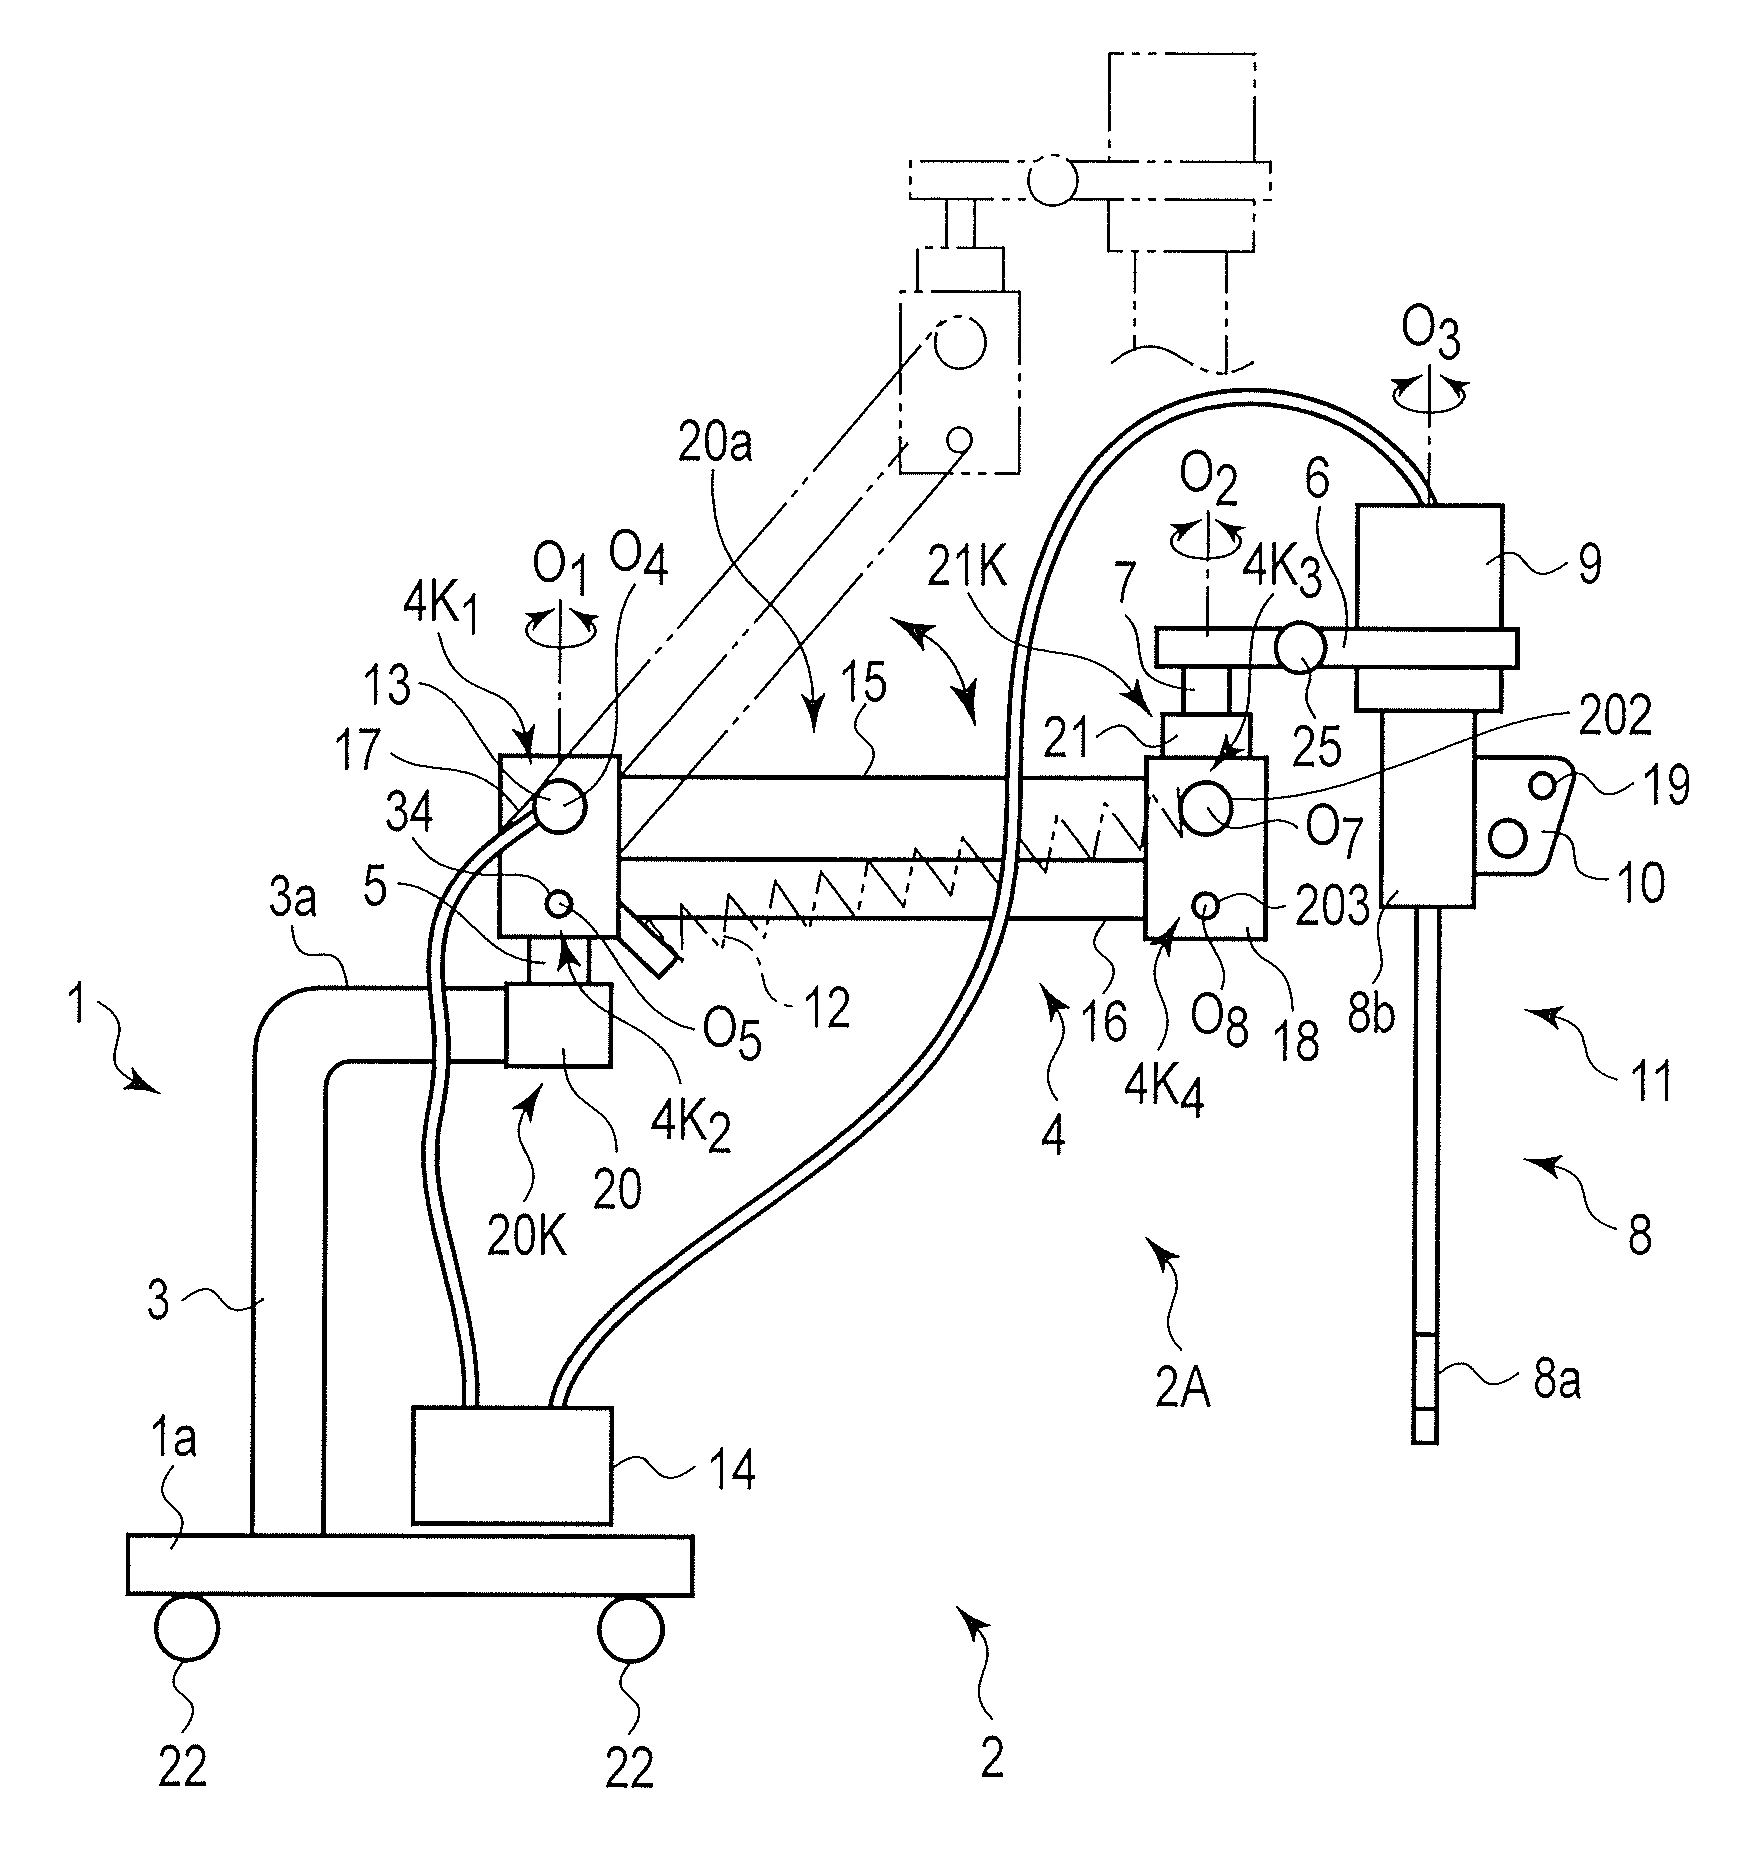 Supporting apparatus for medical device